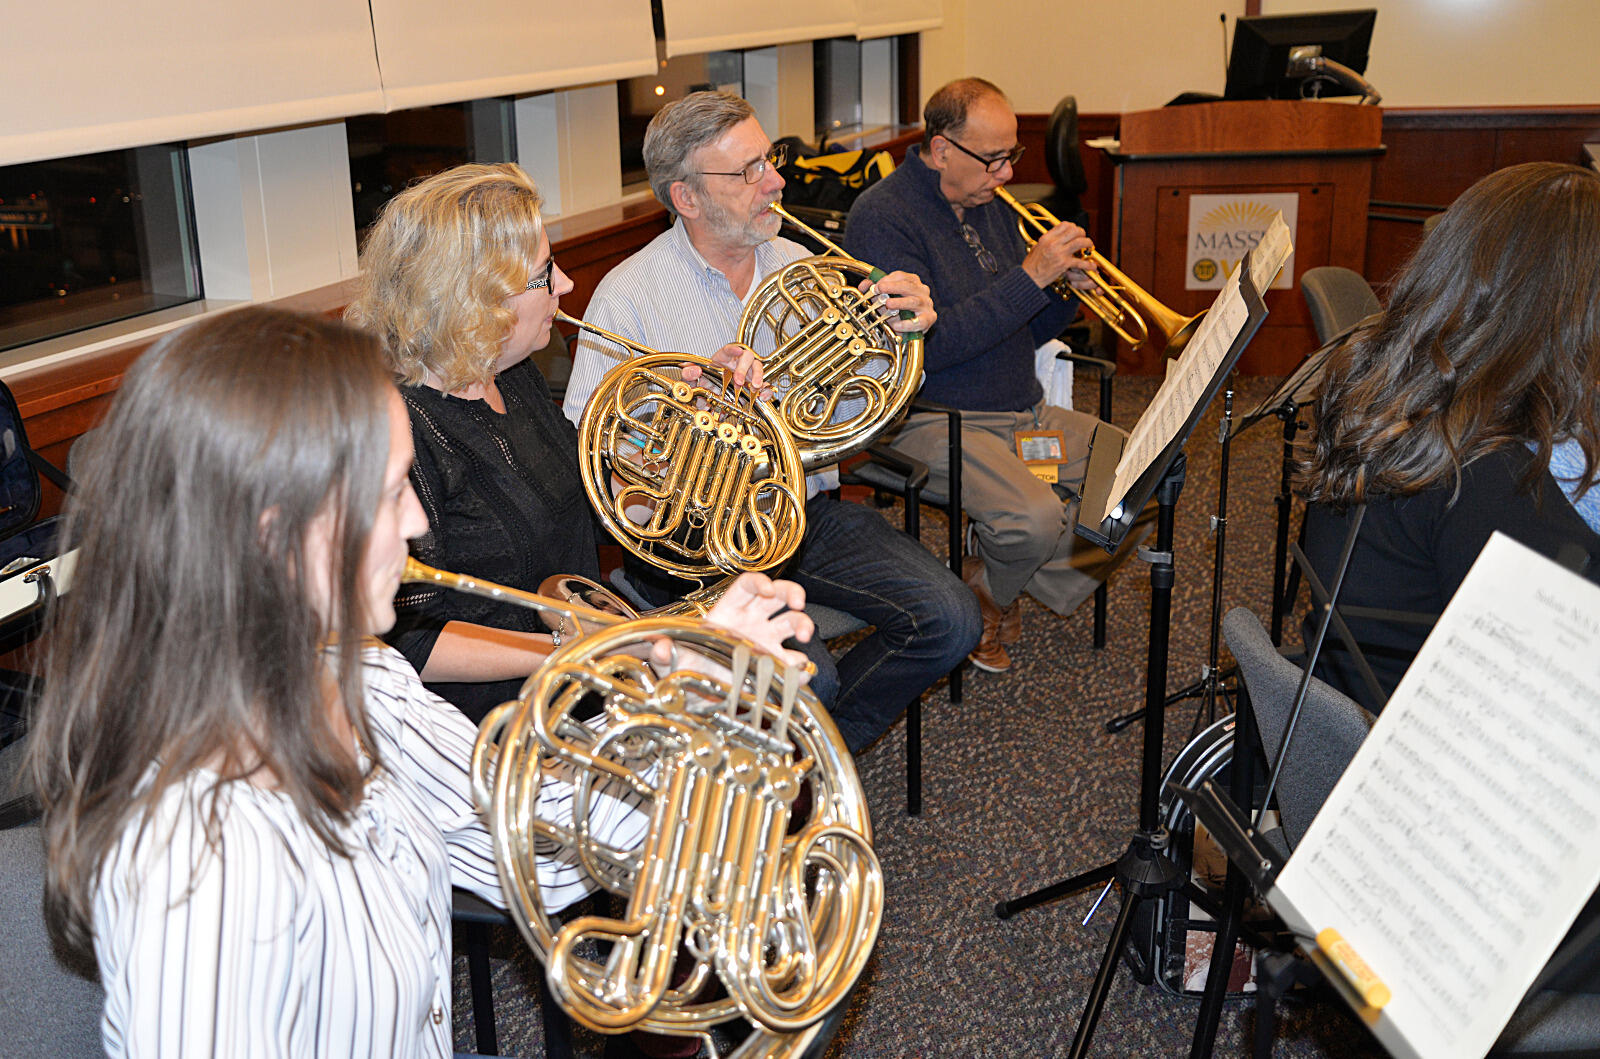 Members of the VCU Health Orchestra’s brass section at their first rehearsal.

